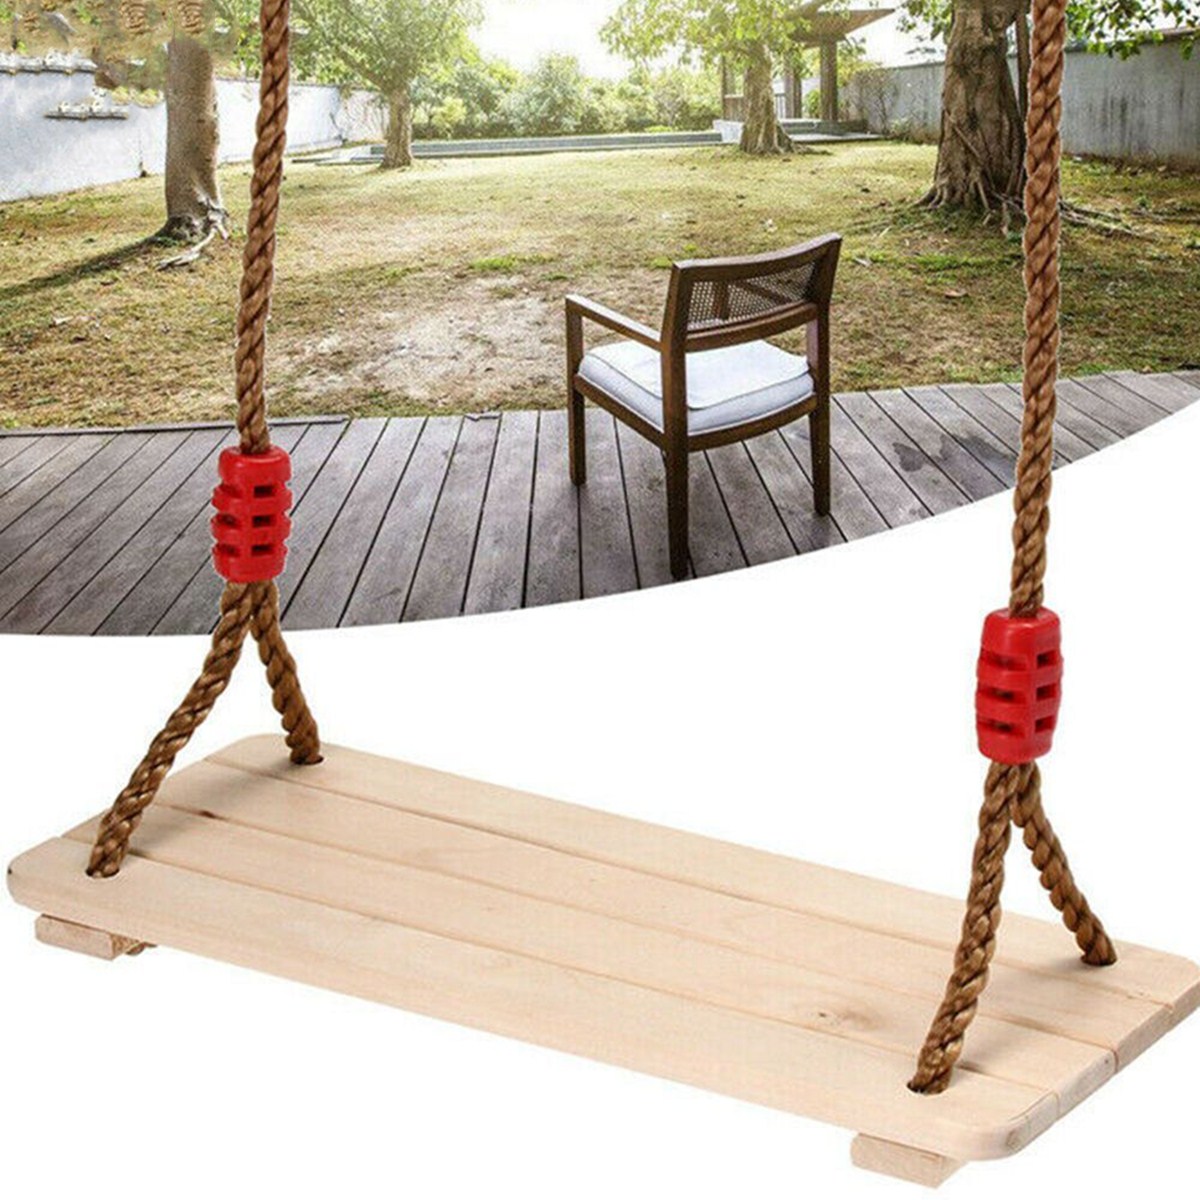 KING-DO-WAY-Outdoor-Wooden-Swing-Seat-Hanging-Chair-Porch-Swing-Camping-Garden-Patio-for-Children-935371-1